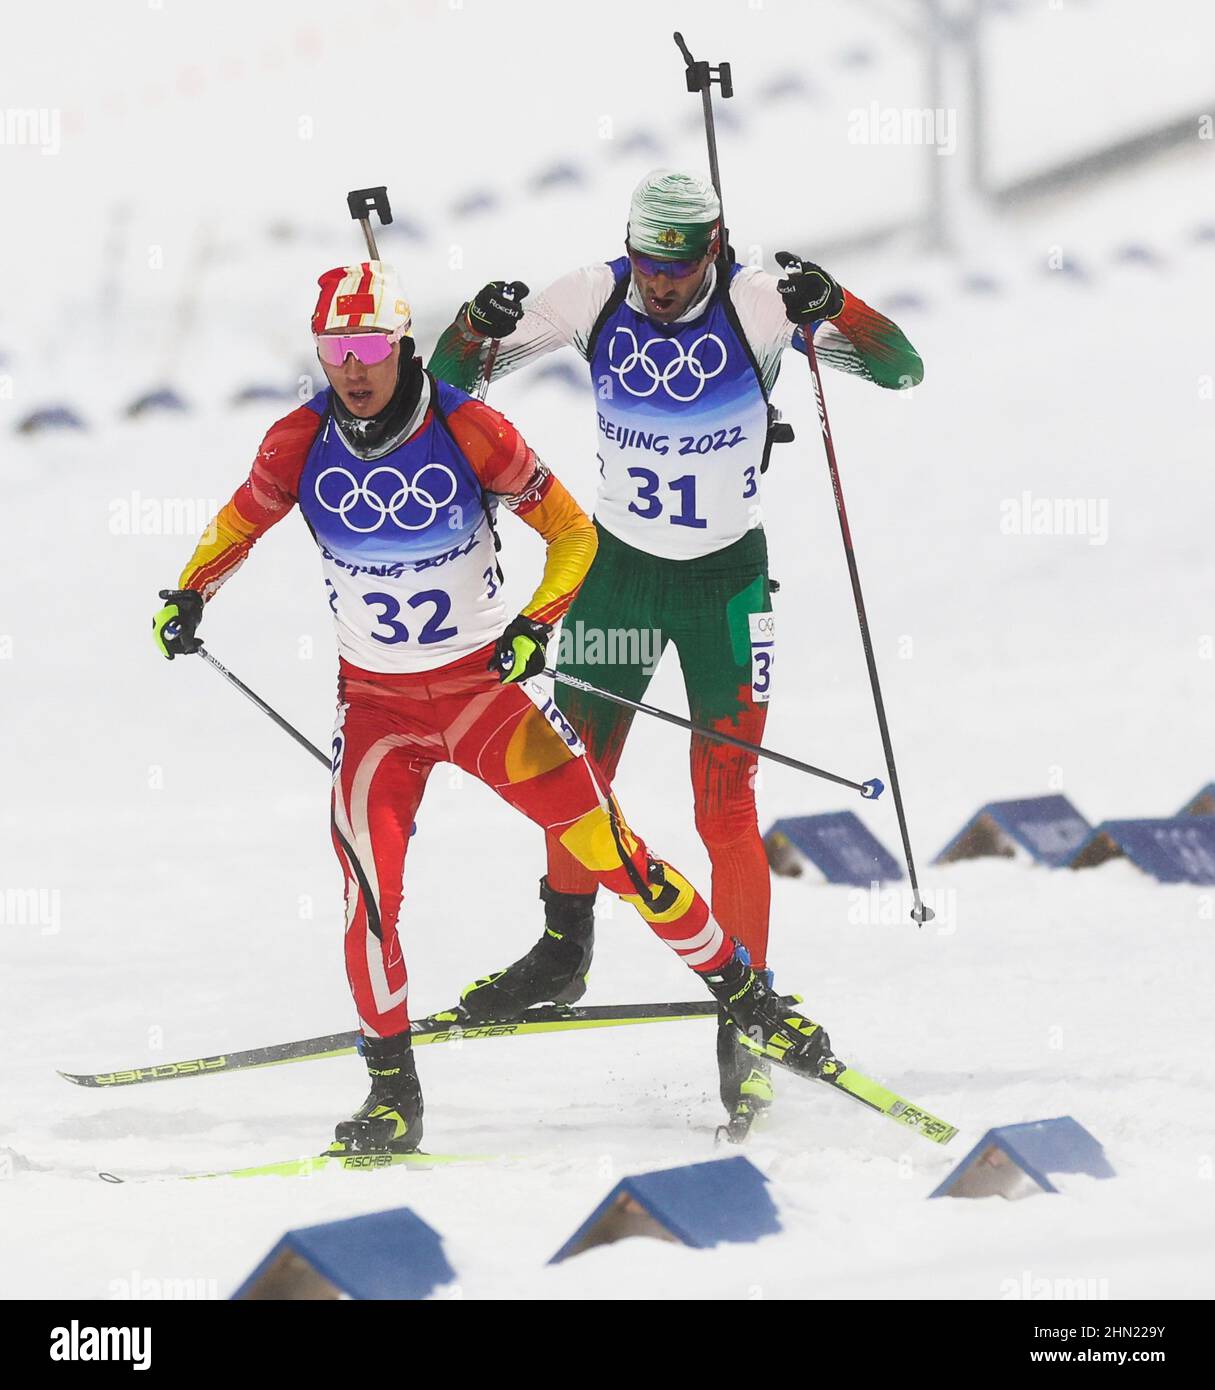 Zhangjiakou, China's Hebei Province. 13th Feb, 2022. Cheng Fangming (L) of China competes during biathlon men's 12.5km pursuit at National Biathlon Centre in Zhangjiakou, north China's Hebei Province, Feb. 13, 2022. Credit: Ding Ting/Xinhua/Alamy Live News Stock Photo